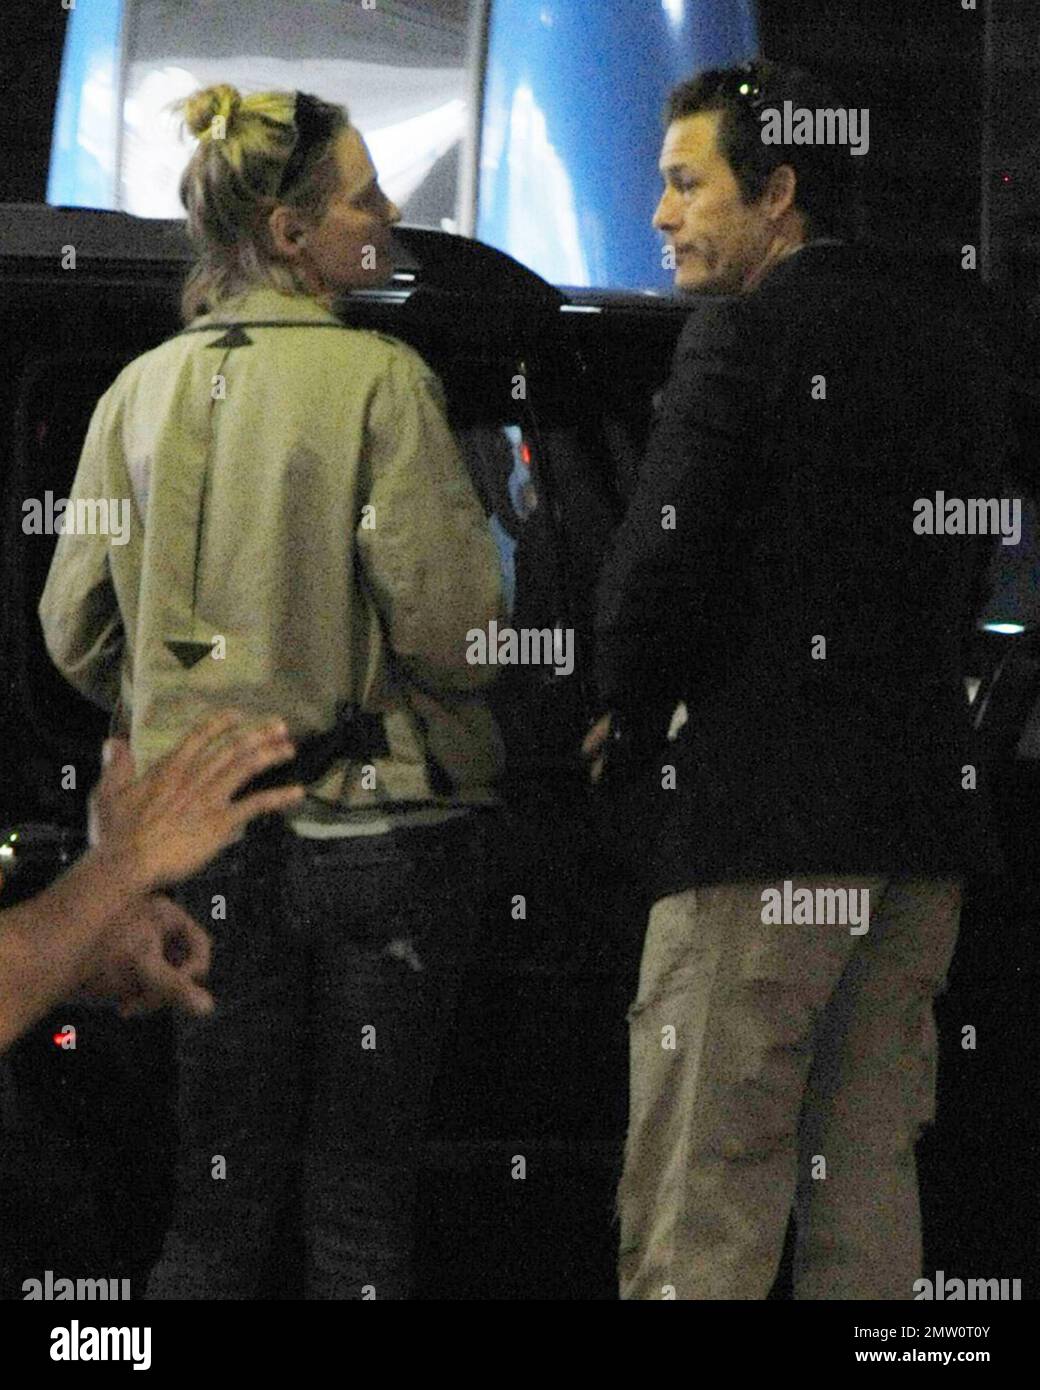 EXCLUSIVE!! Actress Uma Thurman, greeted off again, on again fiance Arpad Busson with a kiss at Miami Intl Airport arrivals. The couple called off their engagement in December 2009 after two years of dating but have obviously rekindled their romance.  Thurman has been filming her new movie, 'Bel Ami' recently opposite 'Twilight' star Robert Pattinson.  Miami, FL.  03/25/2010   . Stock Photo